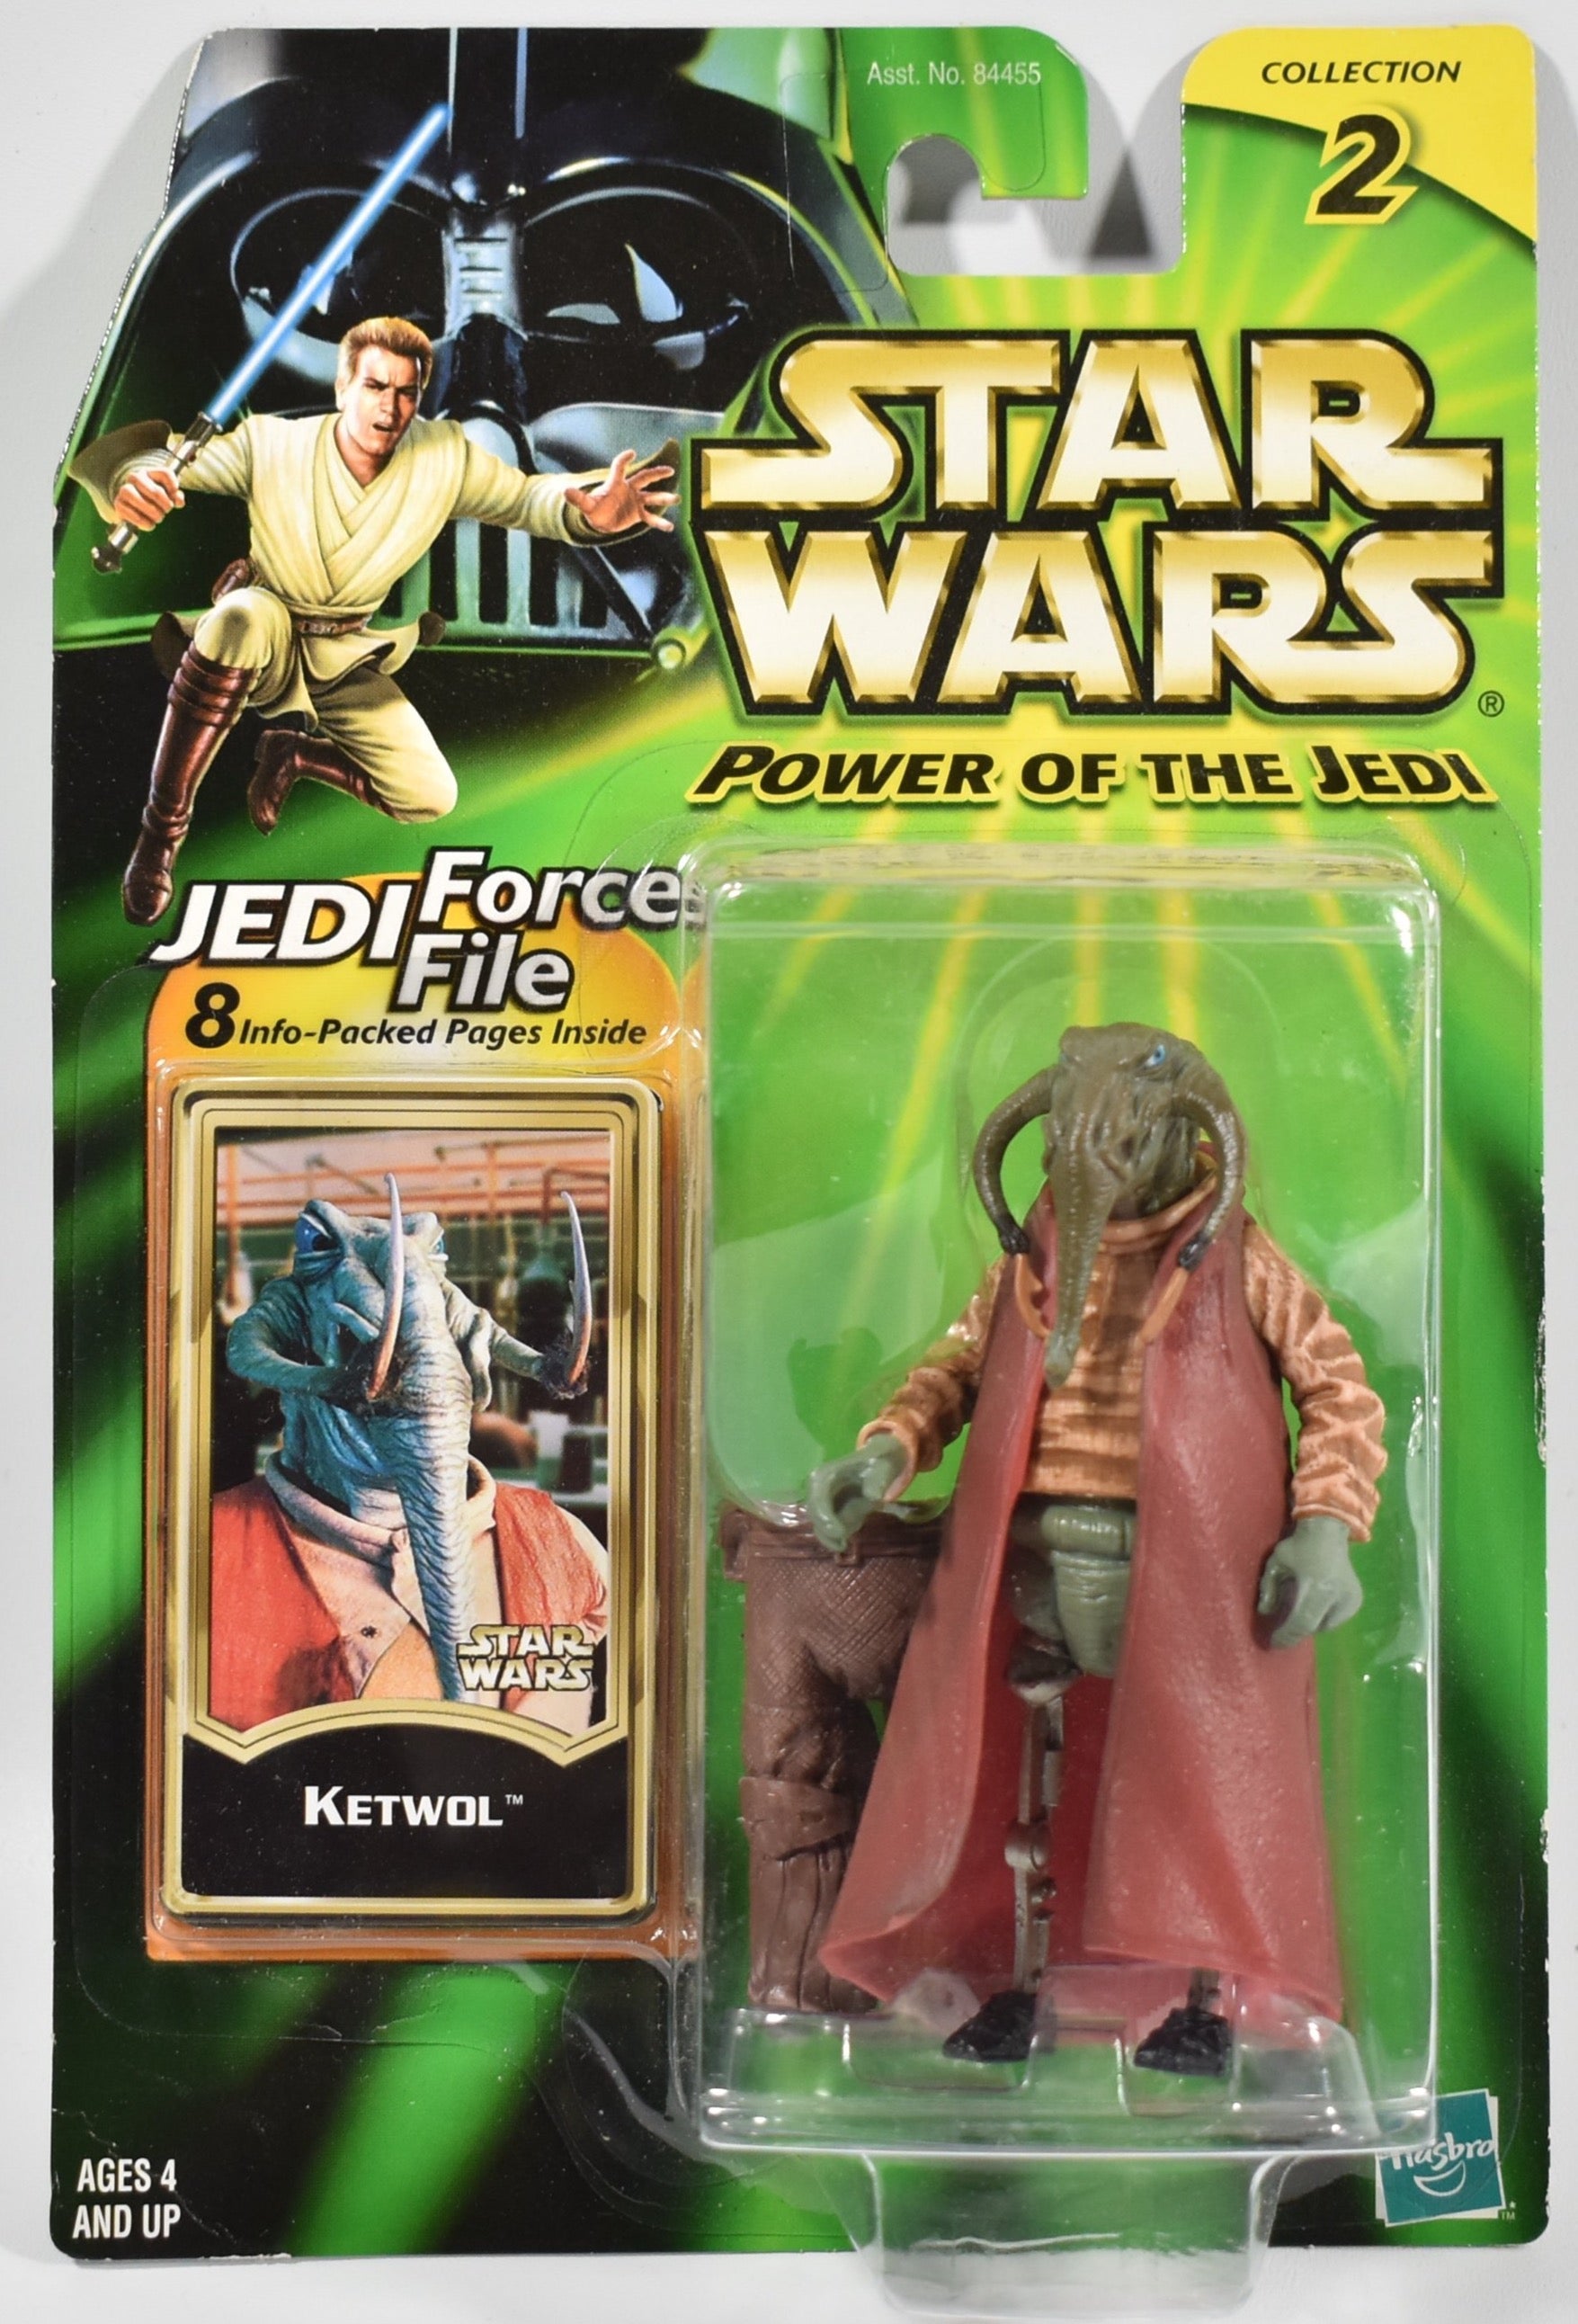 Star Wars Power of the Jedi Action Figure Ketwol Collection 2